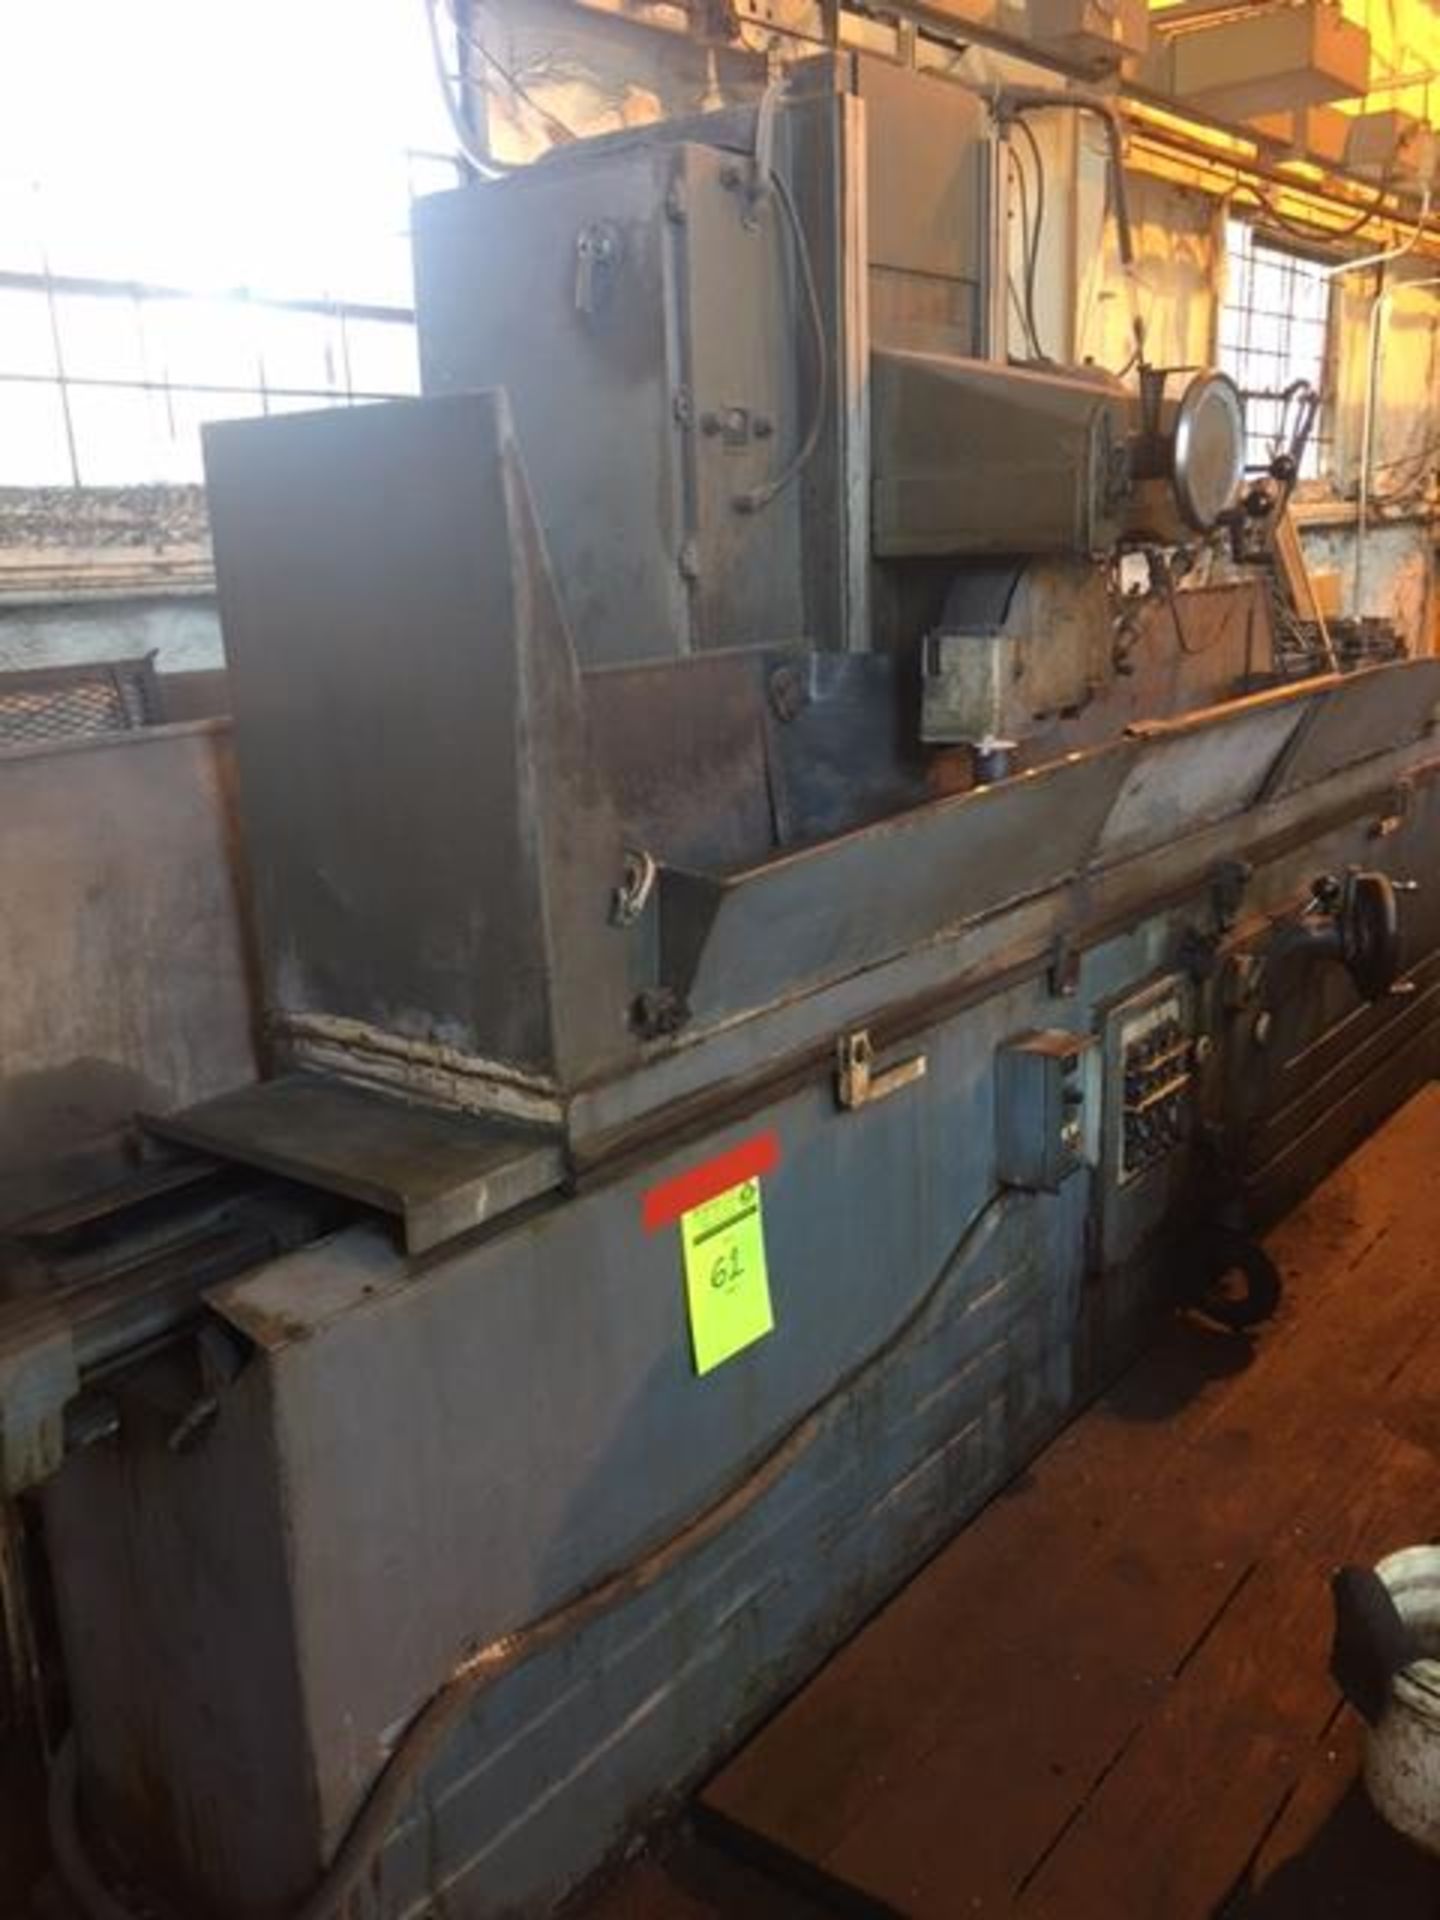 Grand Rapids Surface Grinder, 12" x 72" x 14", 12" x 72" magnetic chuck with digital control,